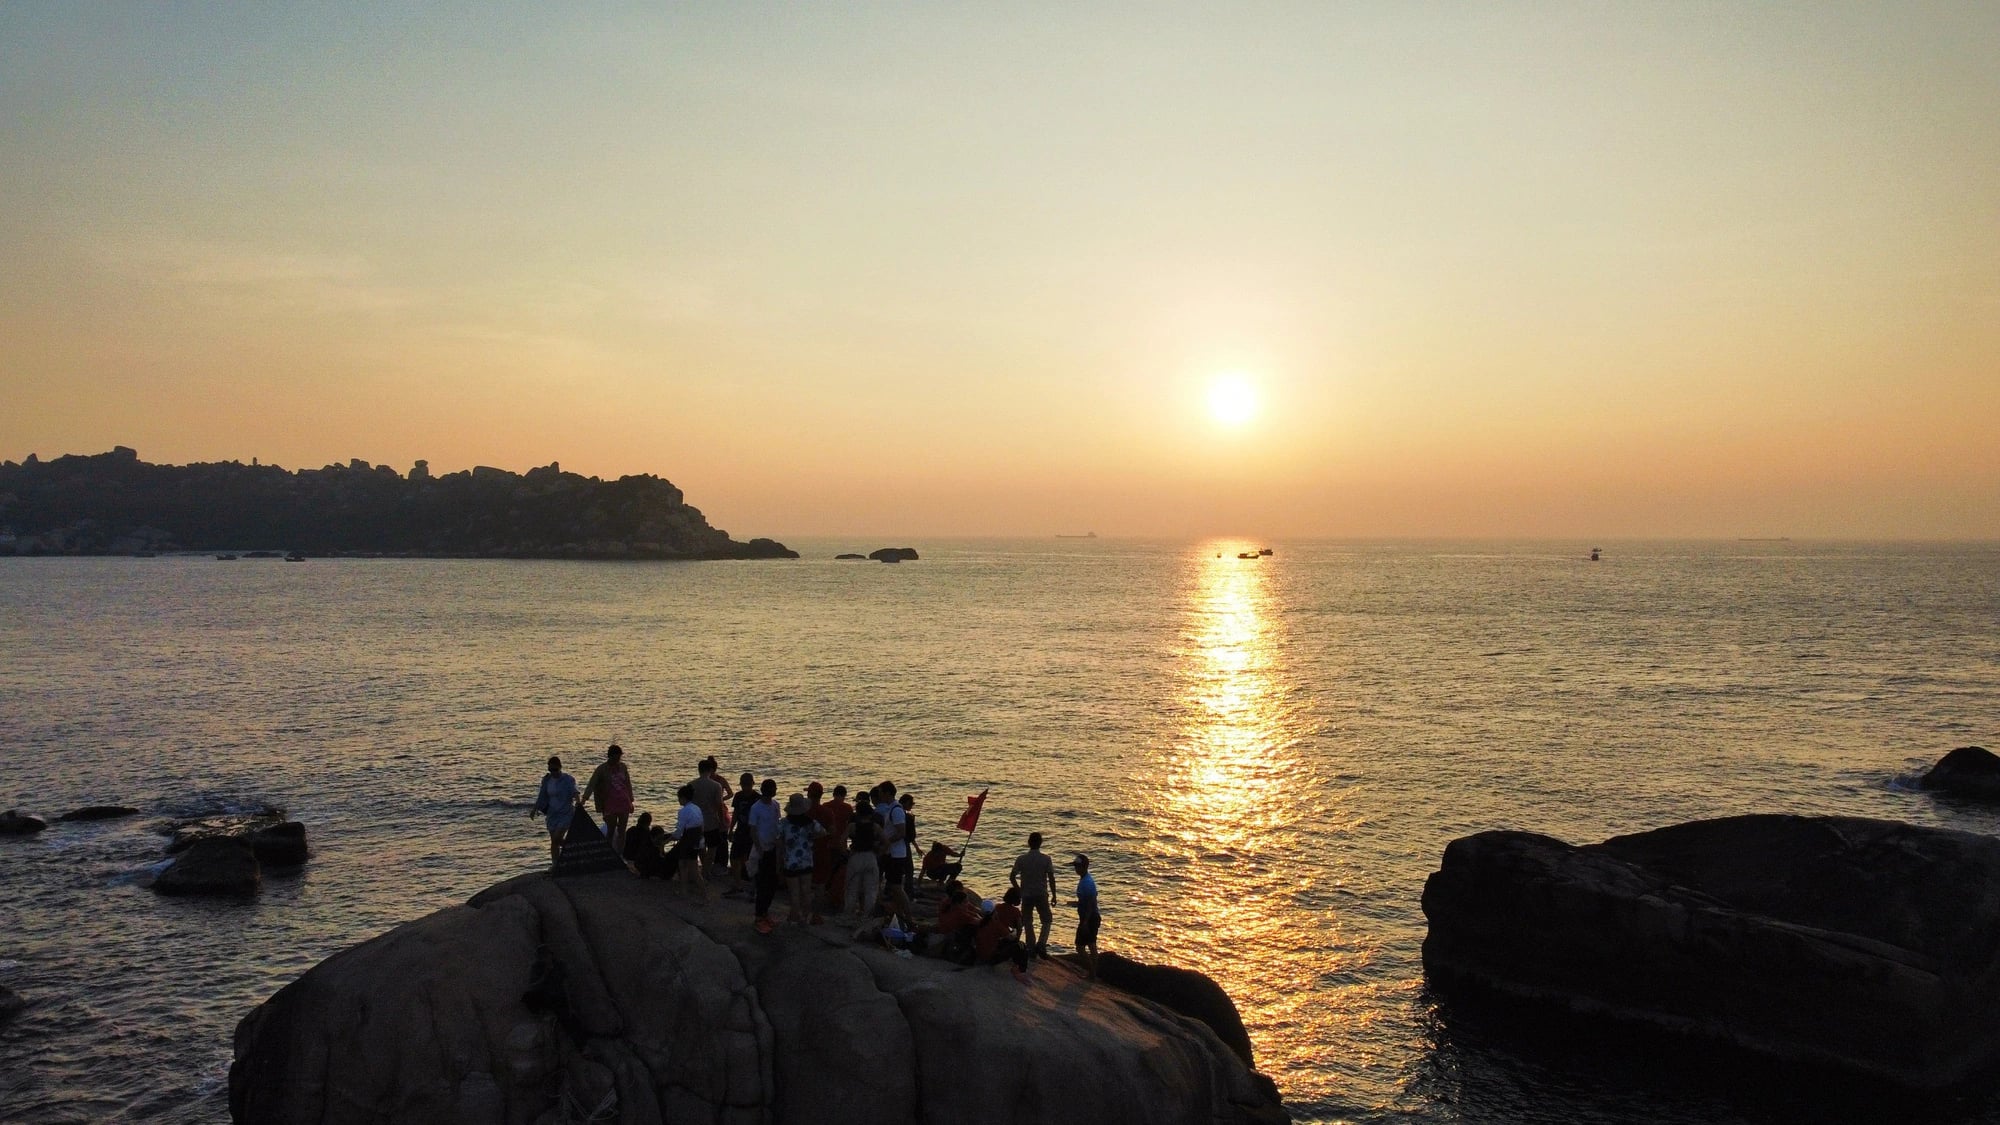 What's it like to trek through sand dunes, forests for sunrise at Vietnam's easternmost cape?